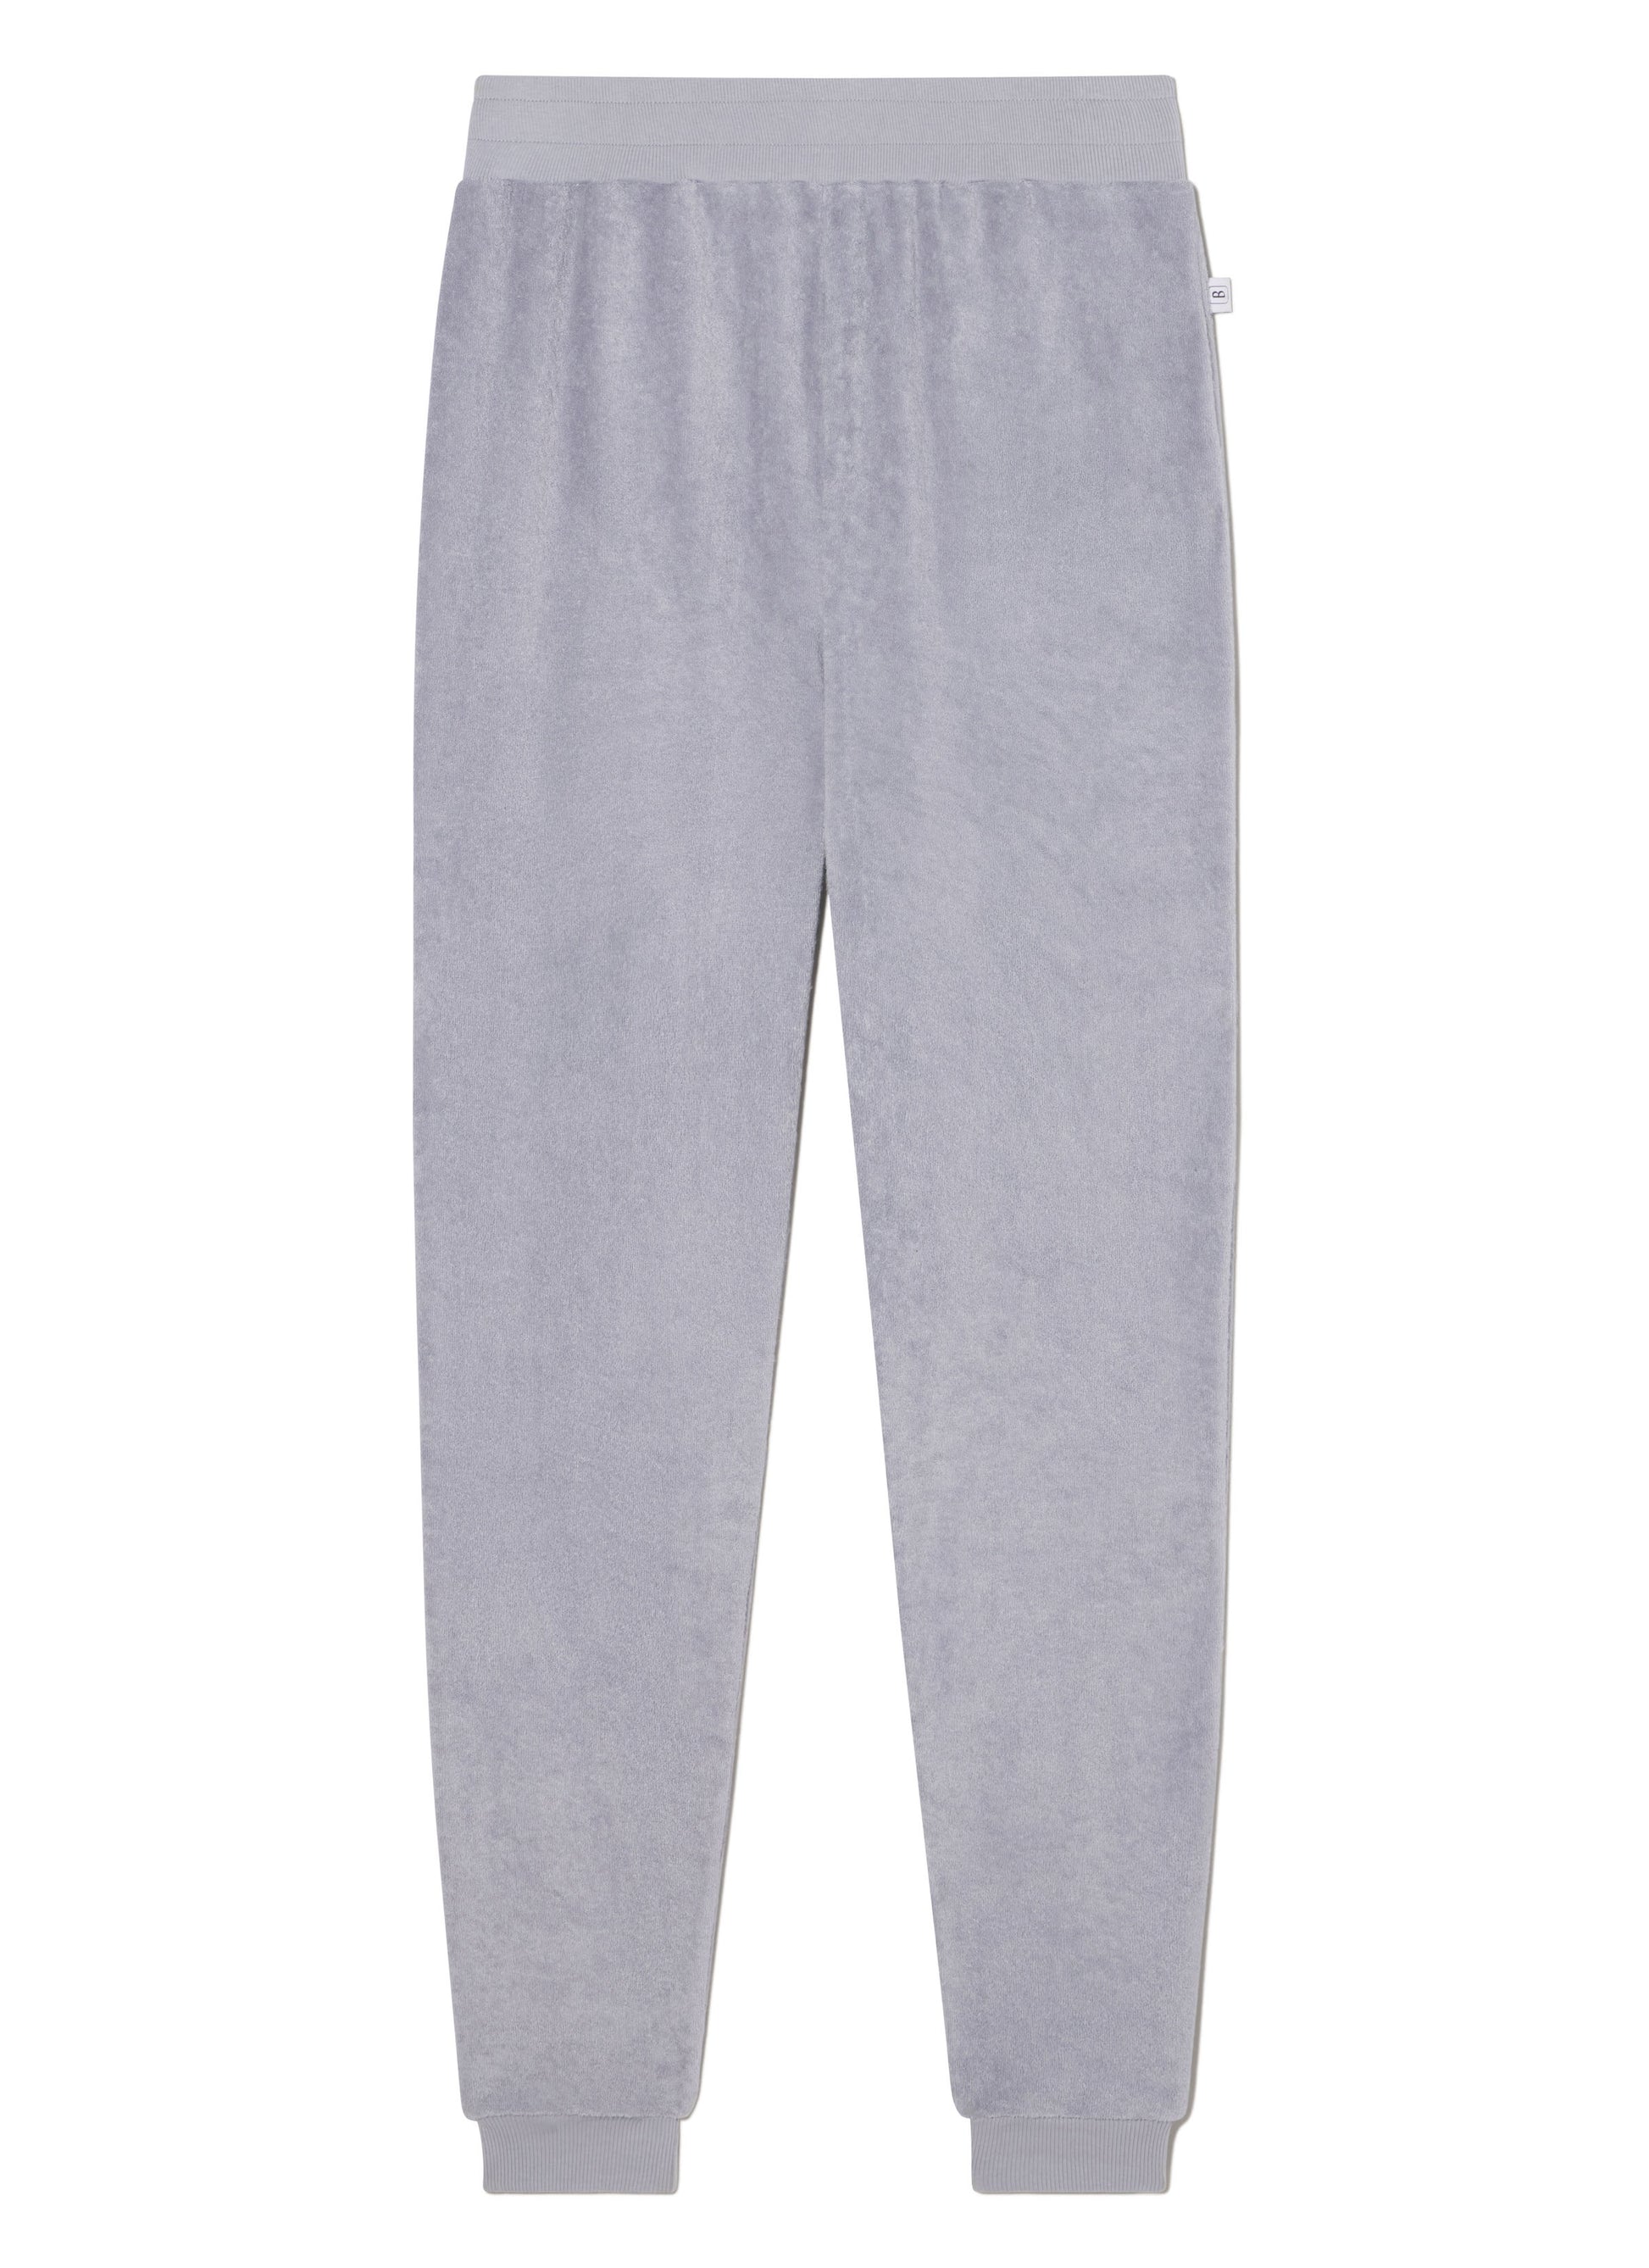 Men's Post Game Joggers, Gym Grey / S, Bottoms - Brownlee